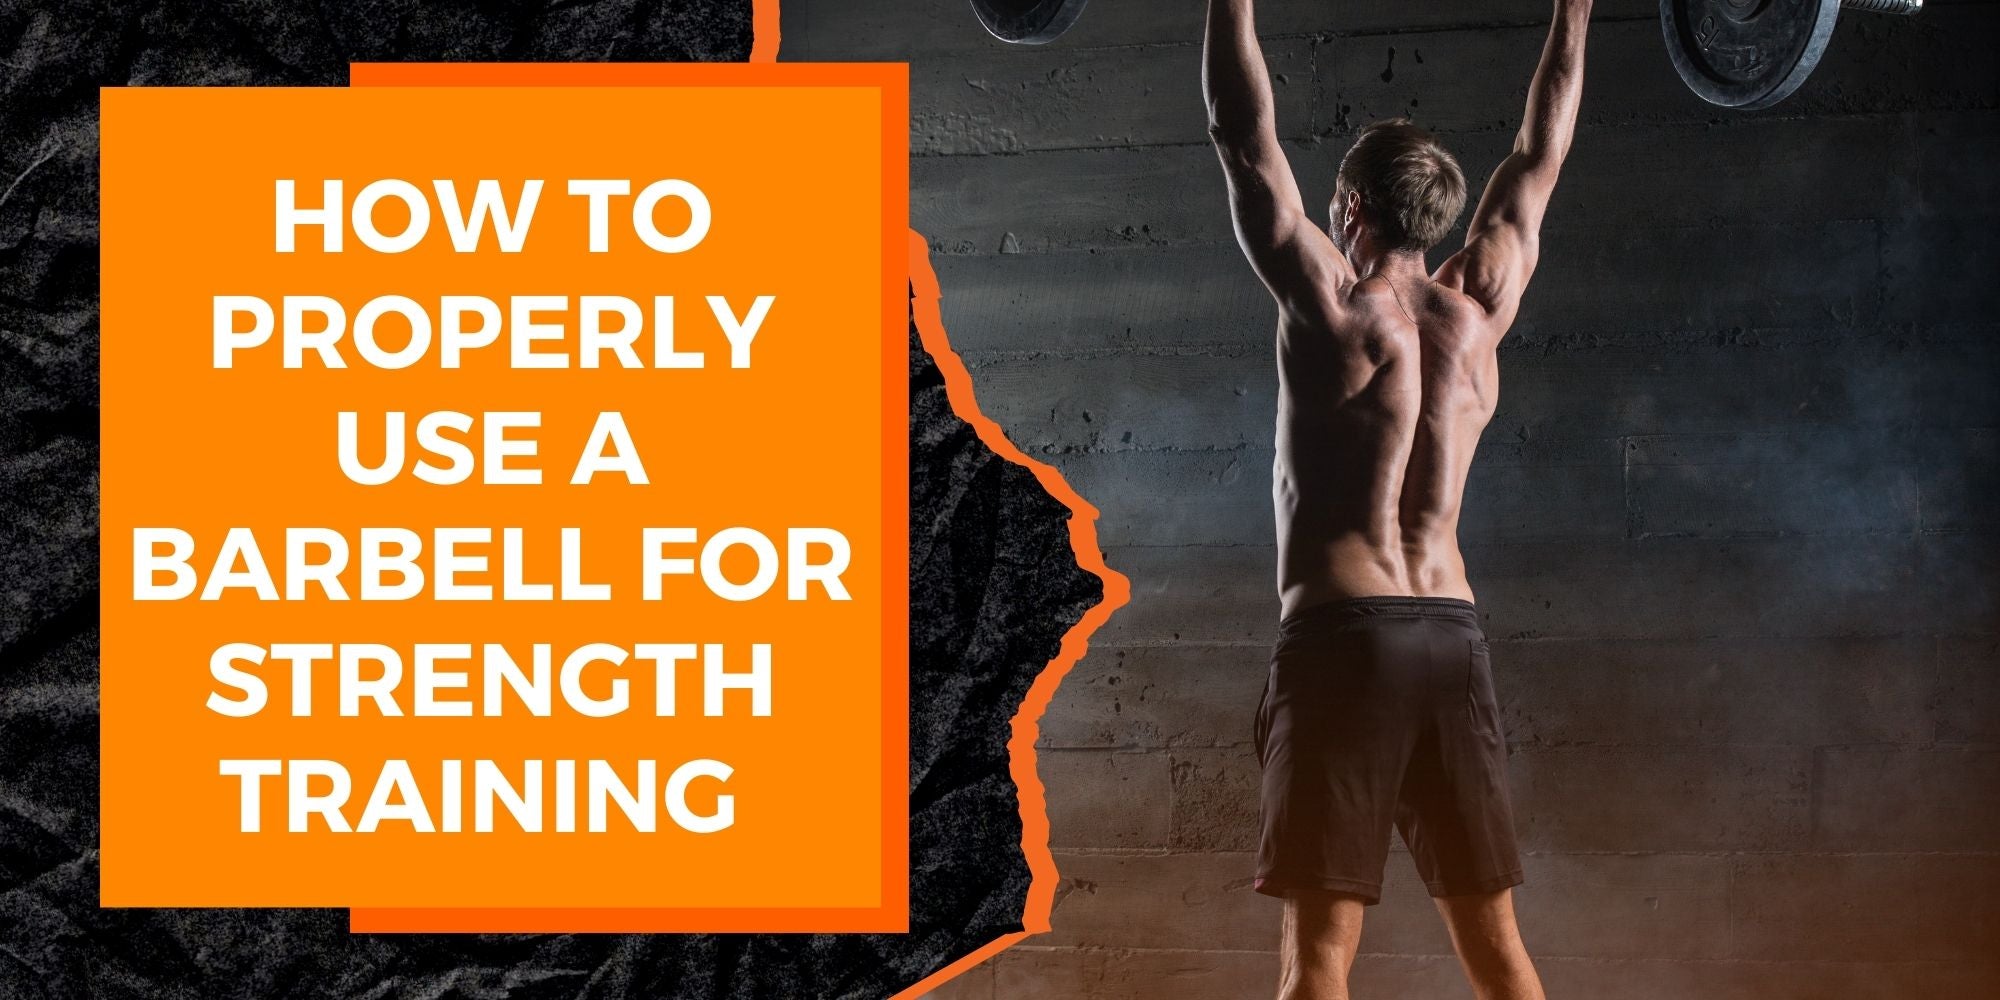 How to Properly Use a Barbell for Strength Training